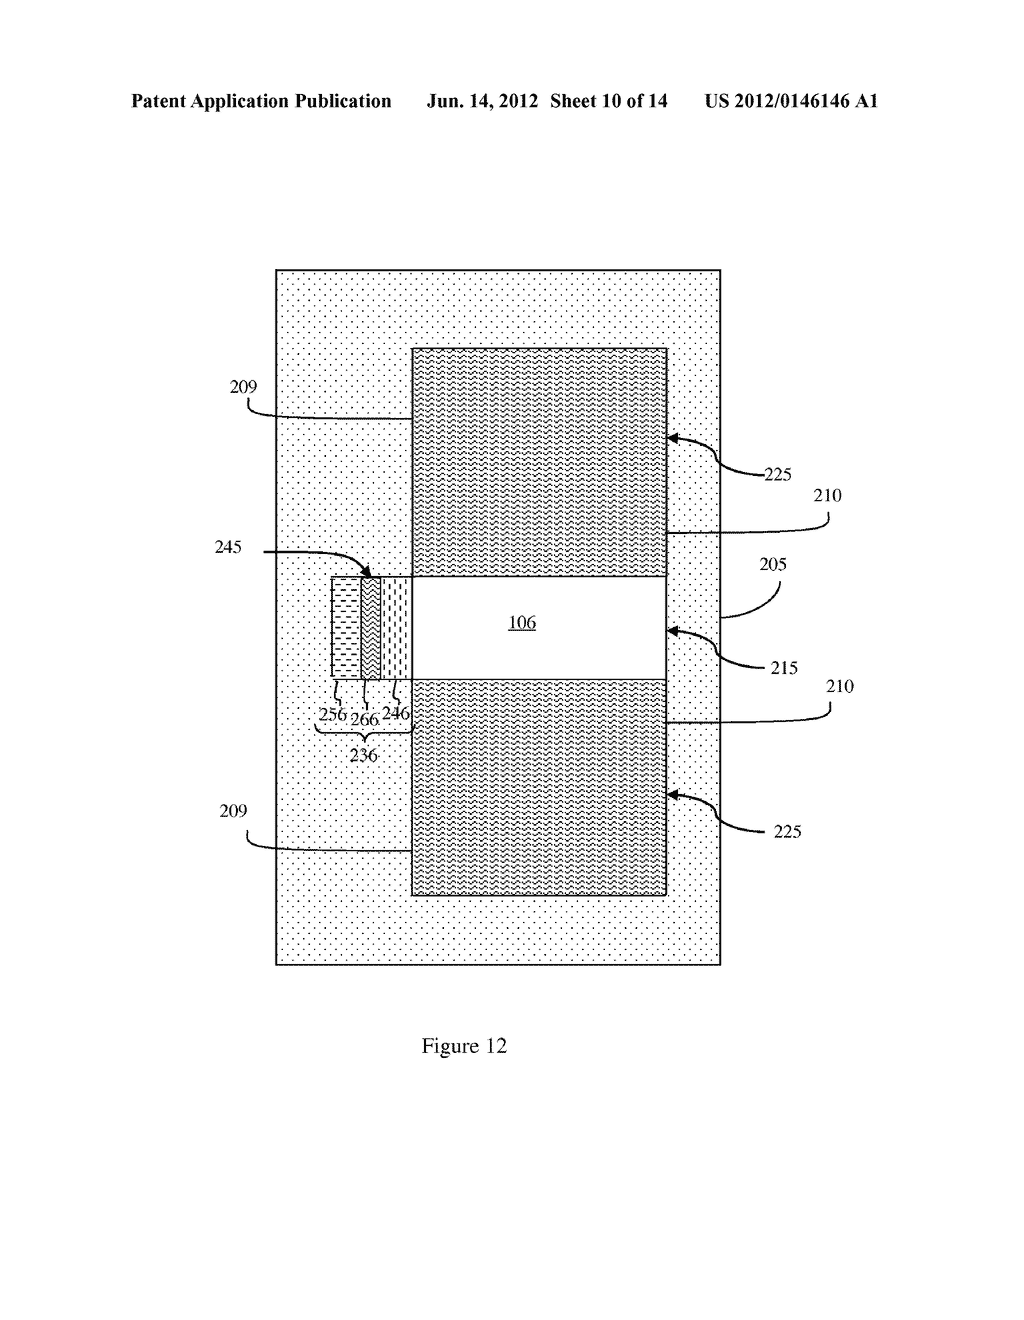 PARTIALLY DEPELETED (DP) SEMICONDUCTOR-ON-INSULATOR (SOI) FIELD EFFECT     TRANSISTOR (FET) STRUCTURE WITH A GATE-TO-BODY TUNNEL CURRENT REGION FOR     THRESHOLD VOLTAGE (Vt) LOWERING AND METHOD OF FORMING THE STRUCTURE - diagram, schematic, and image 11